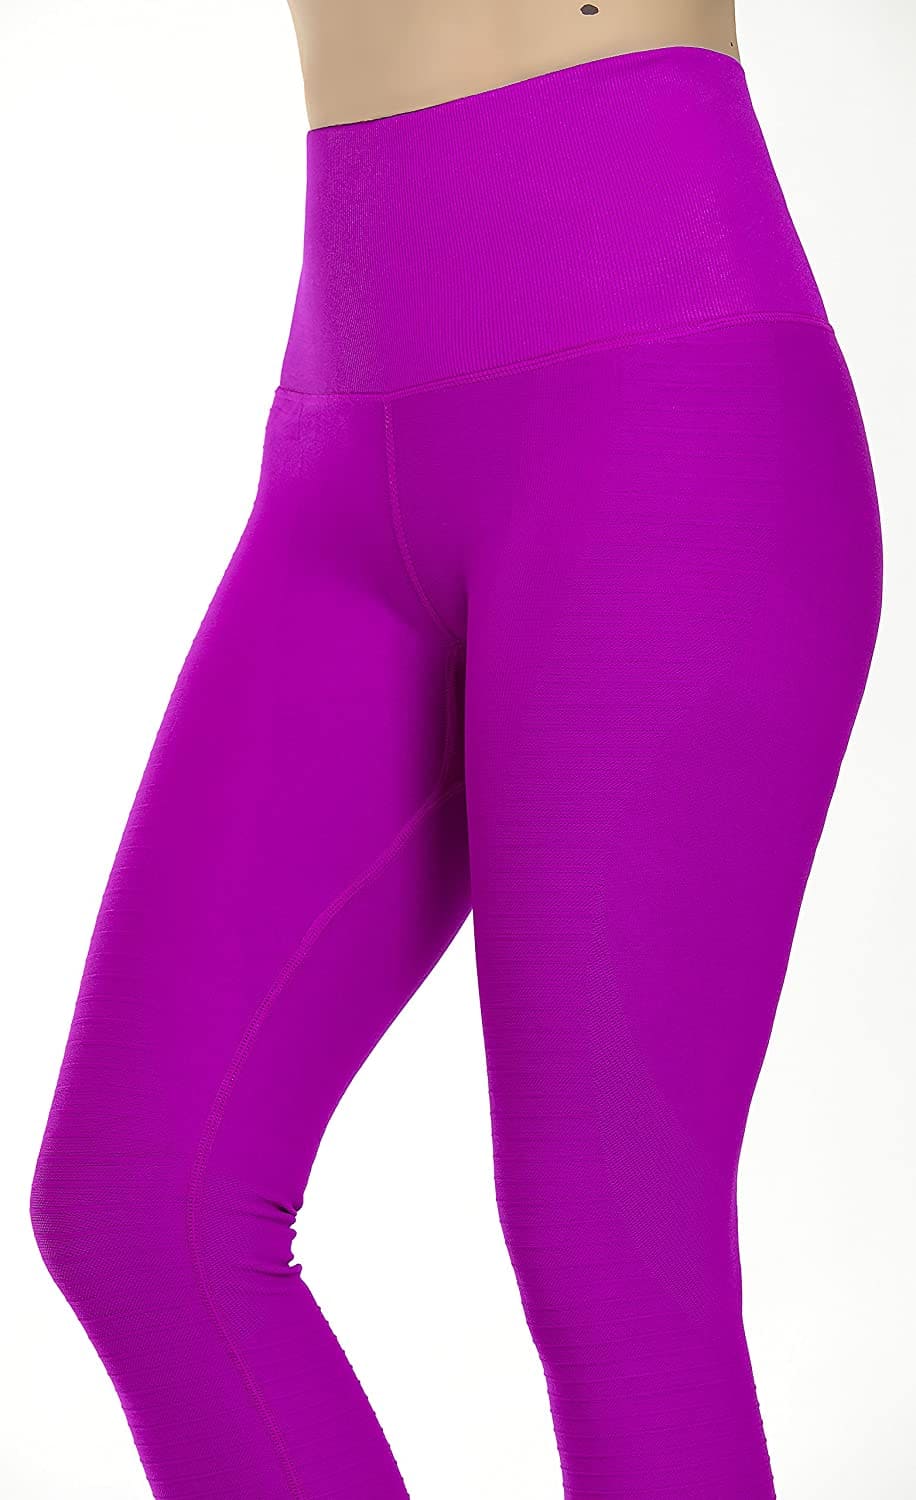  Custer's Night High Waisted Capri Leggings for Women Soft  Stretch Tummy Control Exercise Pants for Running Cycling Workout  Dustypurple S : Clothing, Shoes & Jewelry